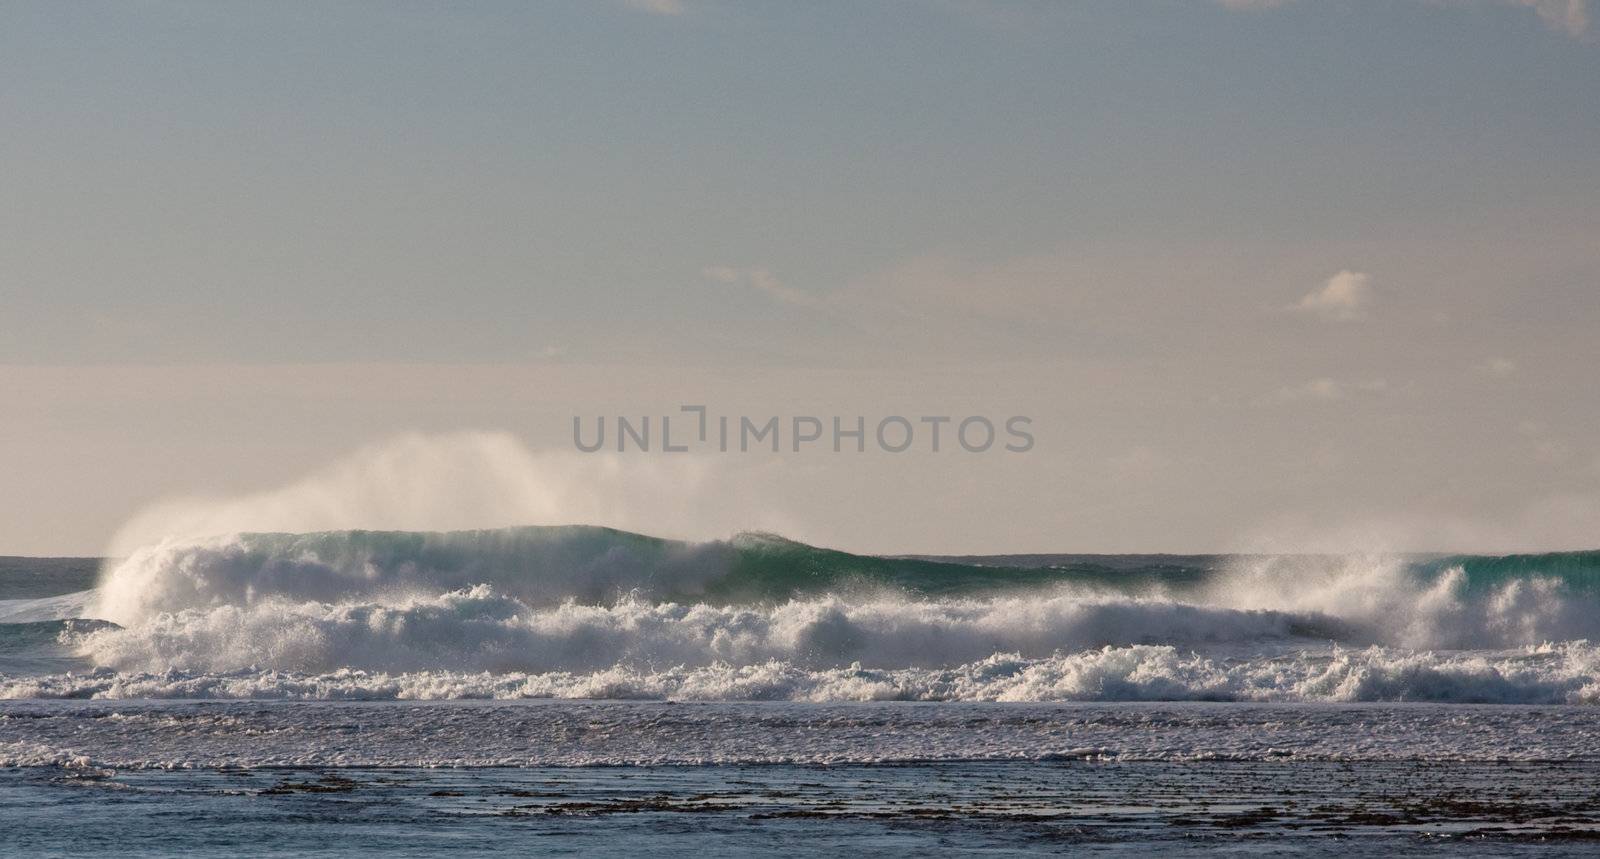 Waves breaking on the reef off a sandy beach by steheap